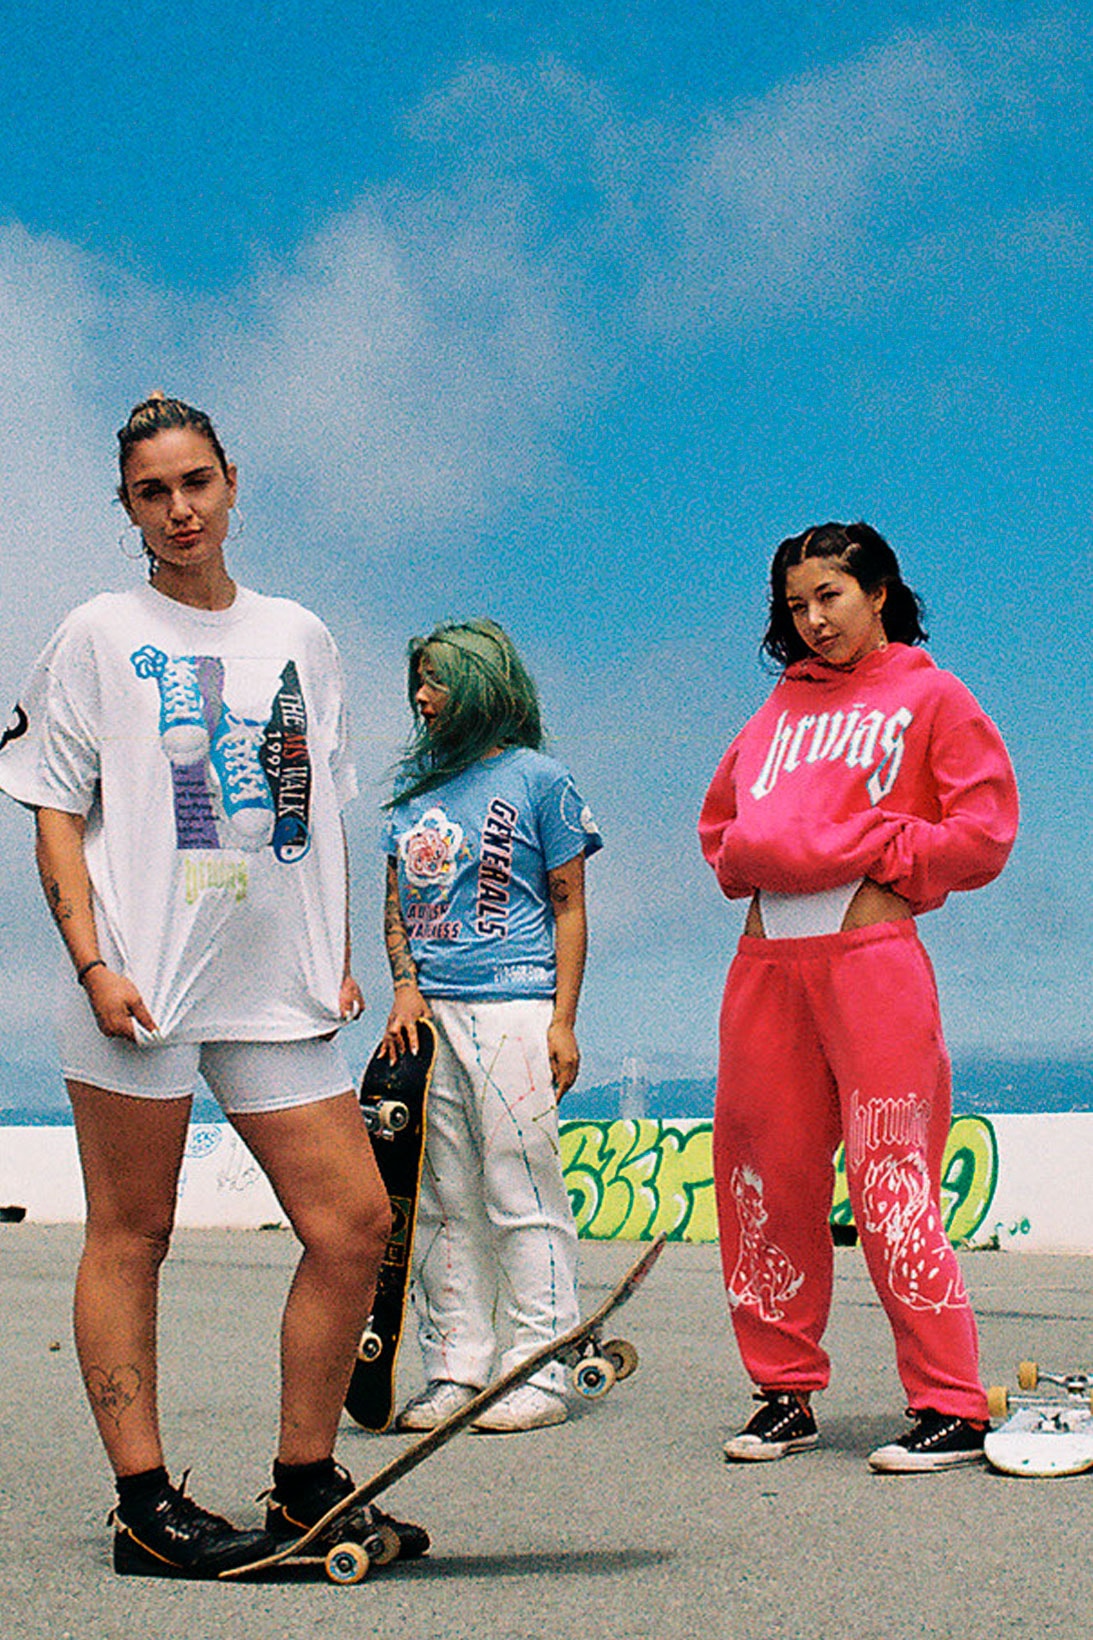 BRUJAS "WORLD SHINE" Collection pink sweatsuit white vintage tee